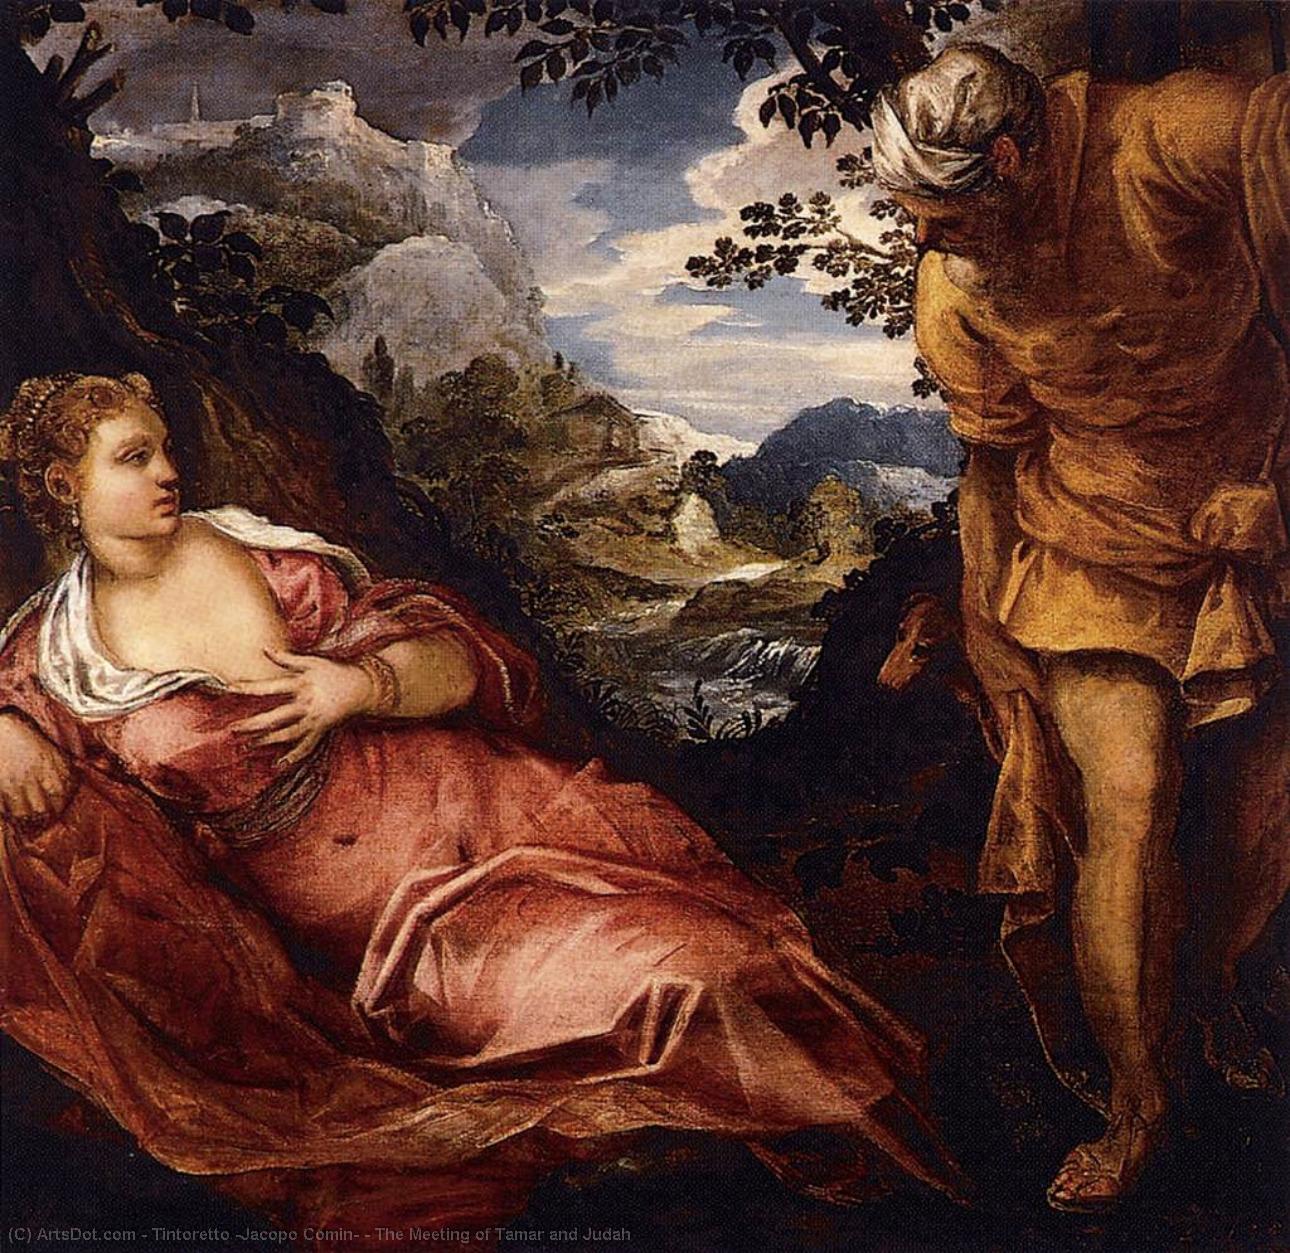 Wikioo.org - สารานุกรมวิจิตรศิลป์ - จิตรกรรม Tintoretto (Jacopo Comin) - The Meeting of Tamar and Judah